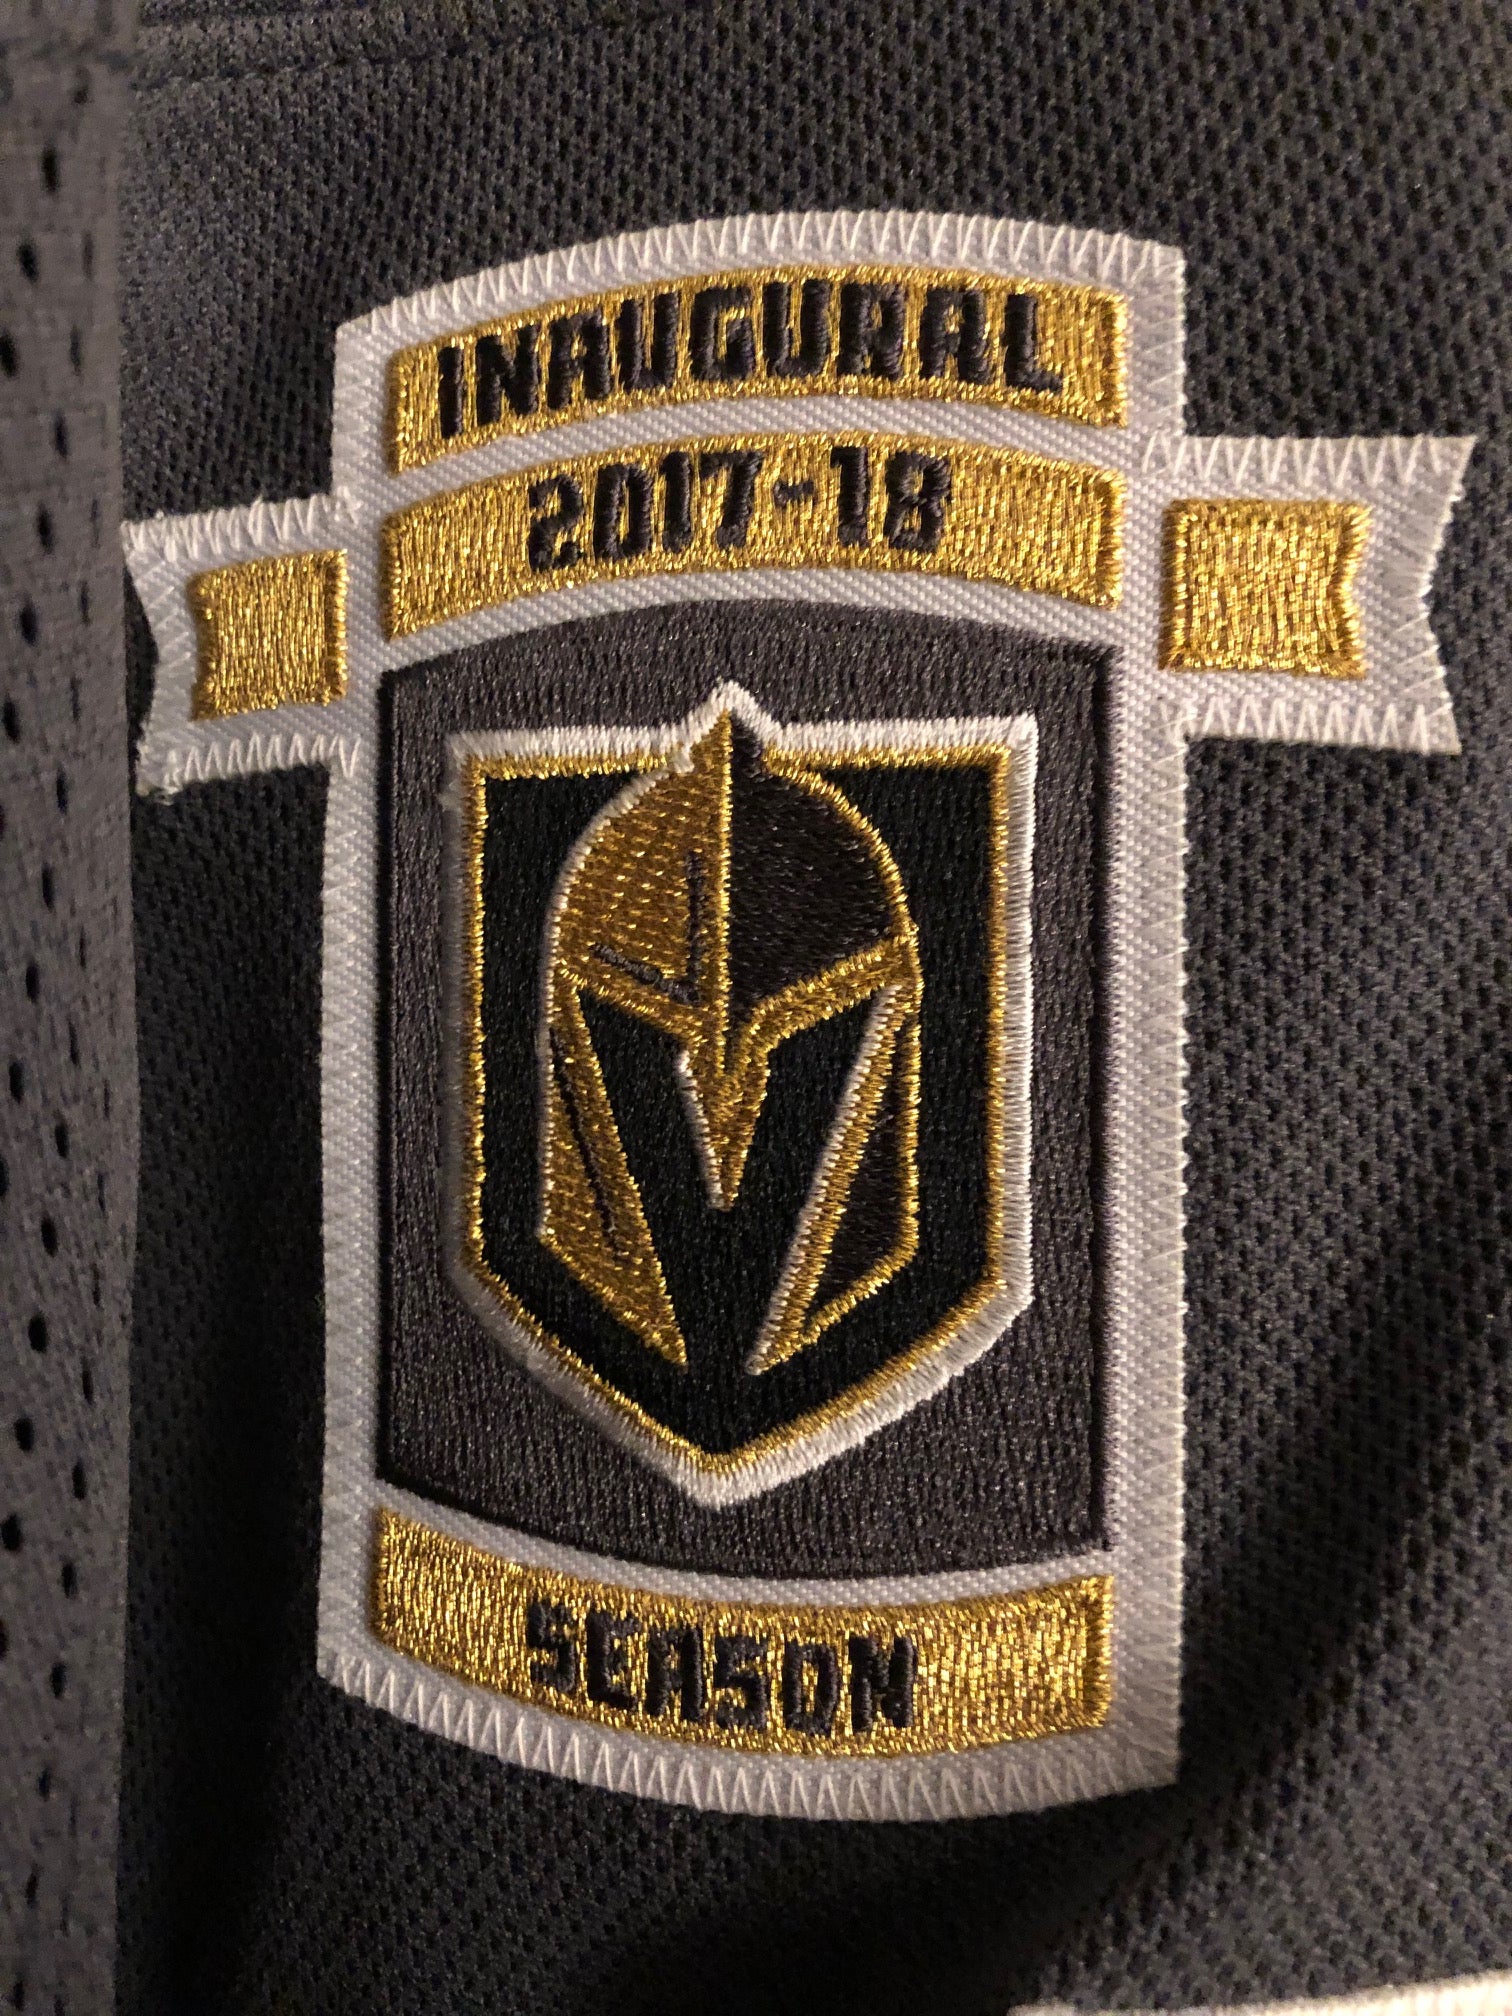 Stone Vegas Golden Knights NWT Custom Home/Gray 3x-Patched Jersey sz 54  ON-ICE Specs!!